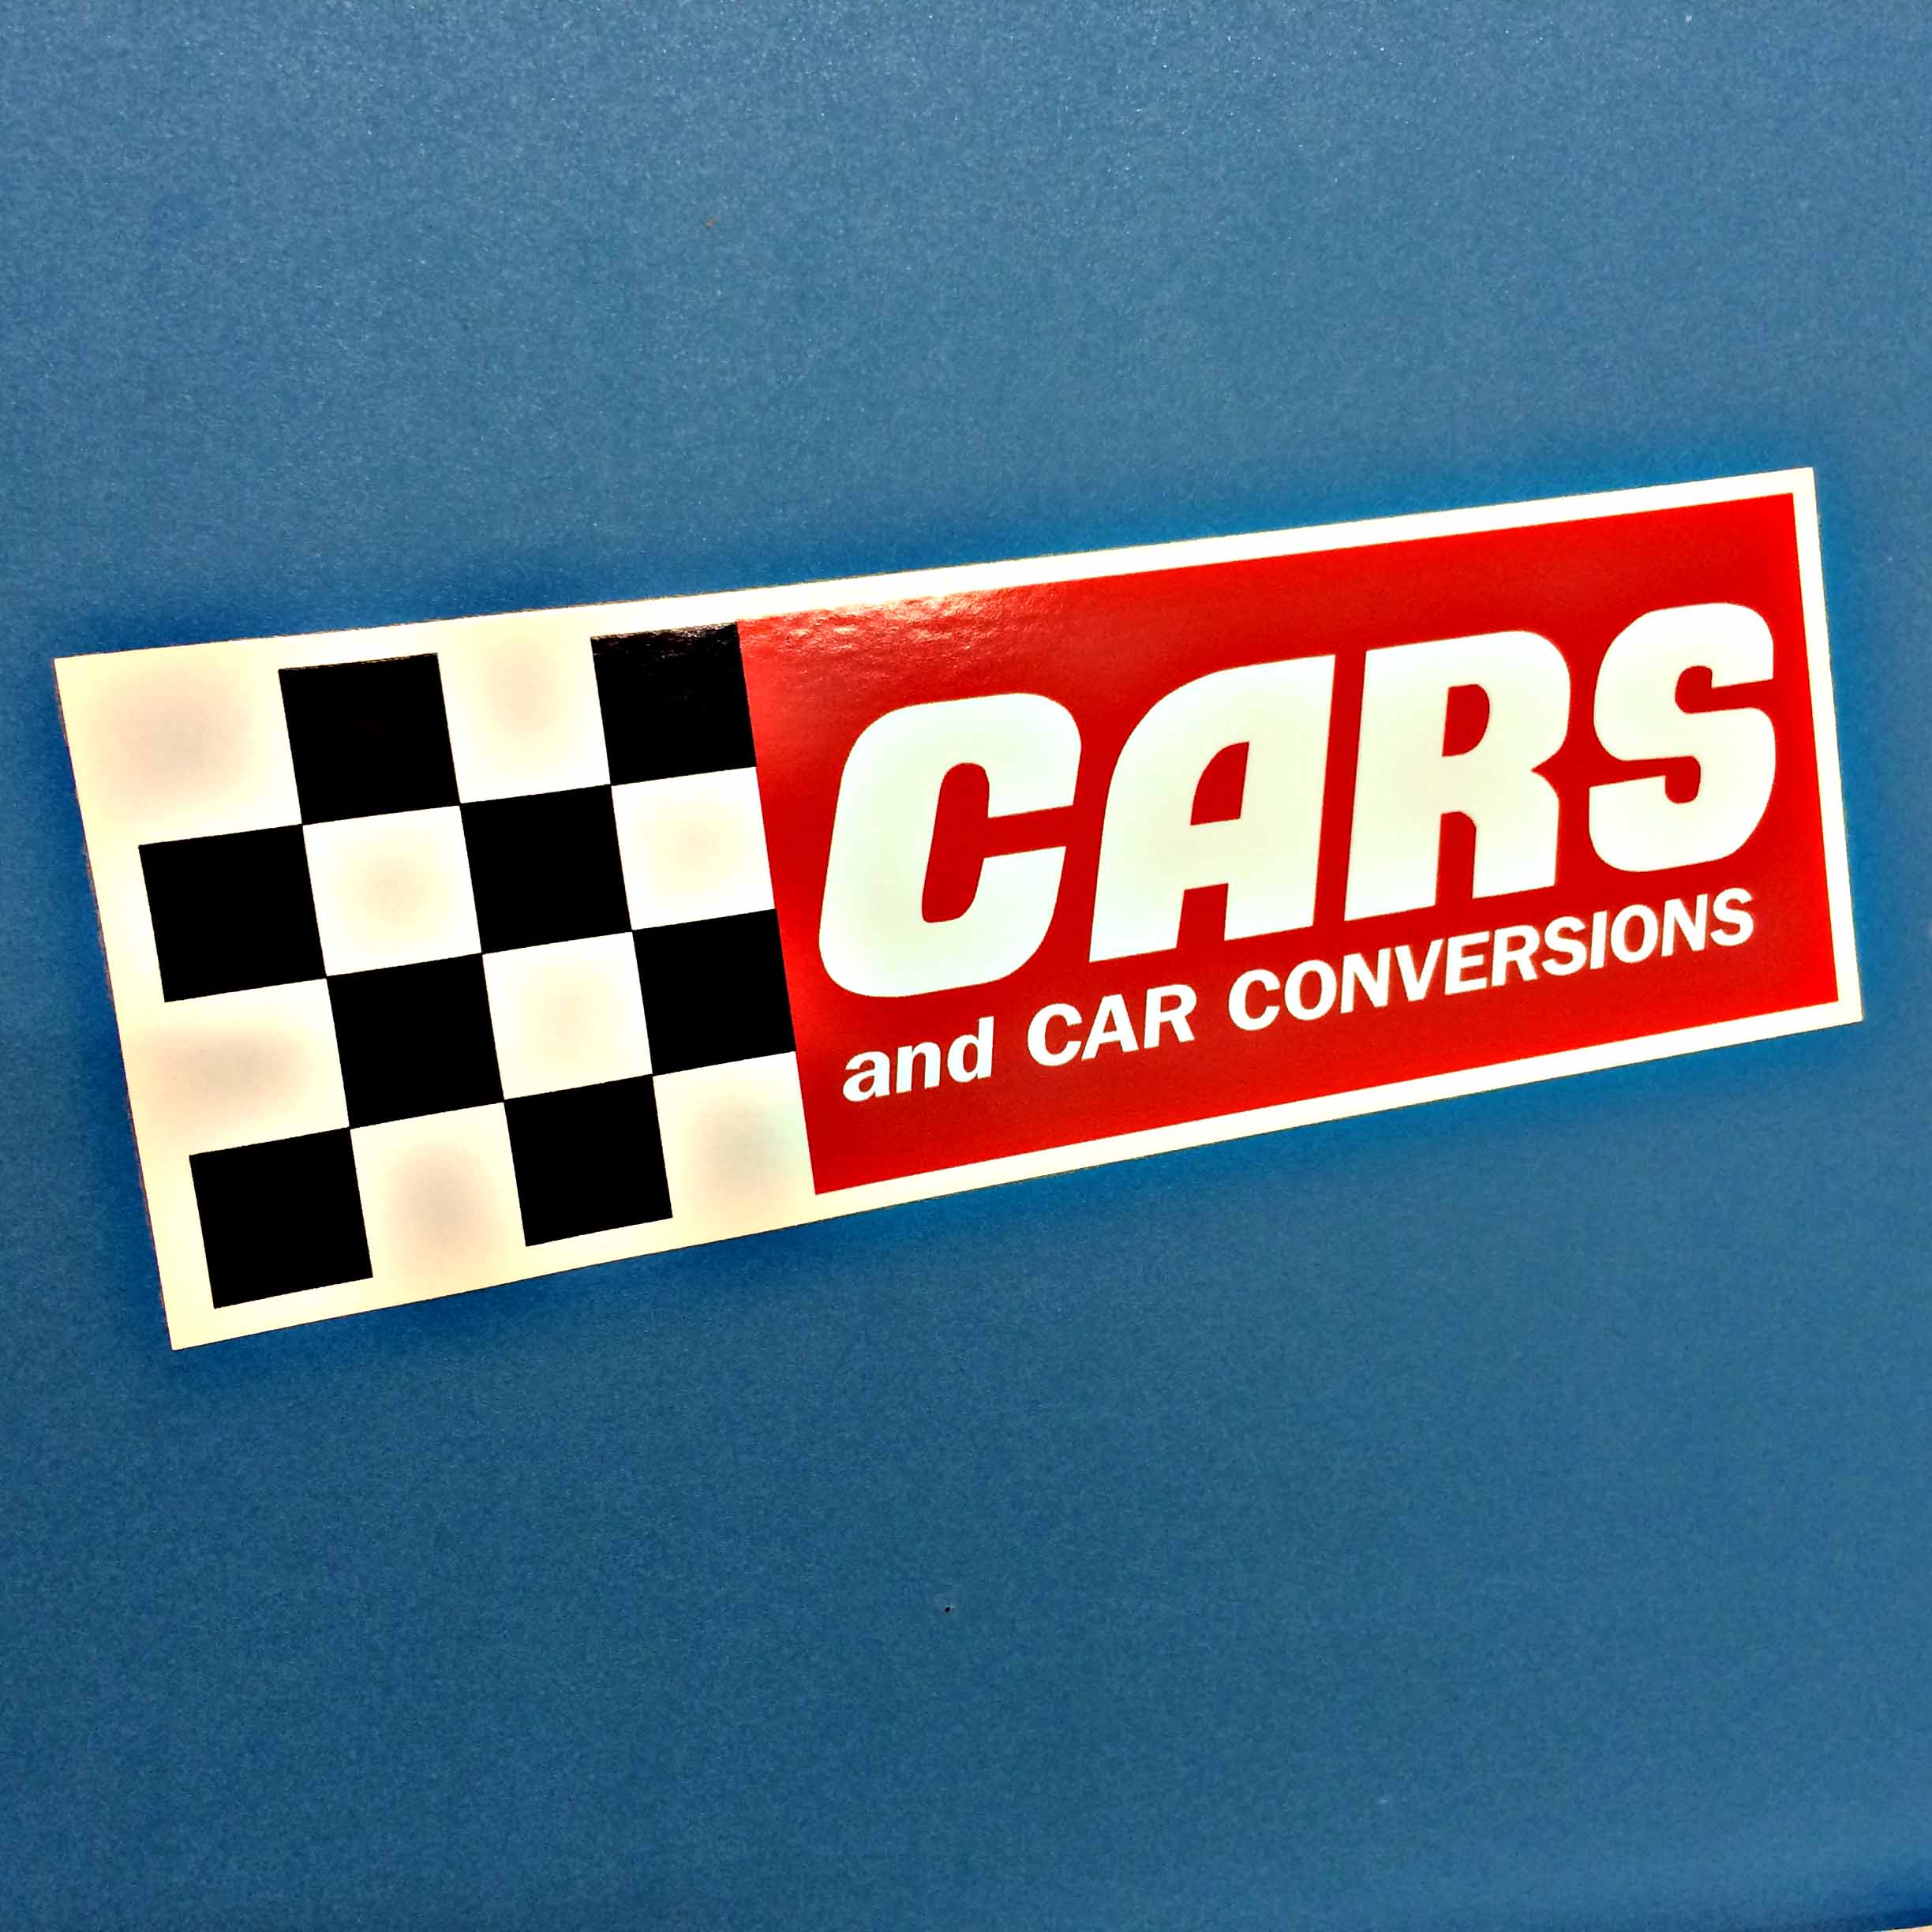 CARS AND CAR CONVERSIONS STICKER. Cars and Car Conversions in white uppercase lettering on a red rectangular background next to a black and white chequer square.